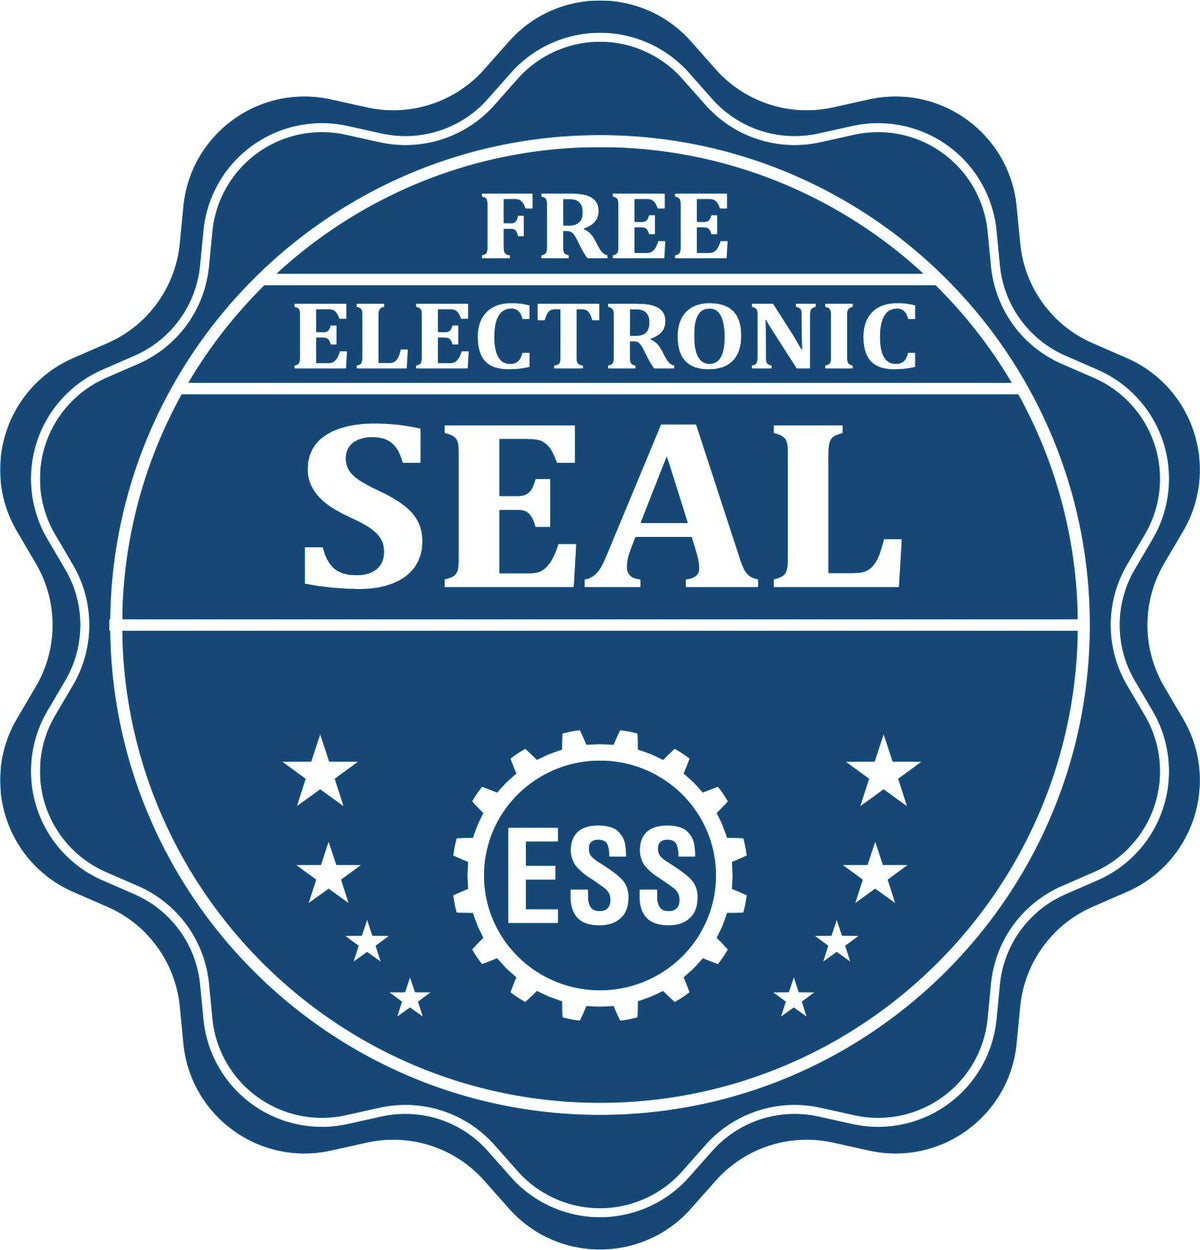 A badge showing a free electronic seal for the Premium MaxLight Pre-Inked Minnesota Landscape Architectural Stamp with stars and the ESS gear on the emblem.